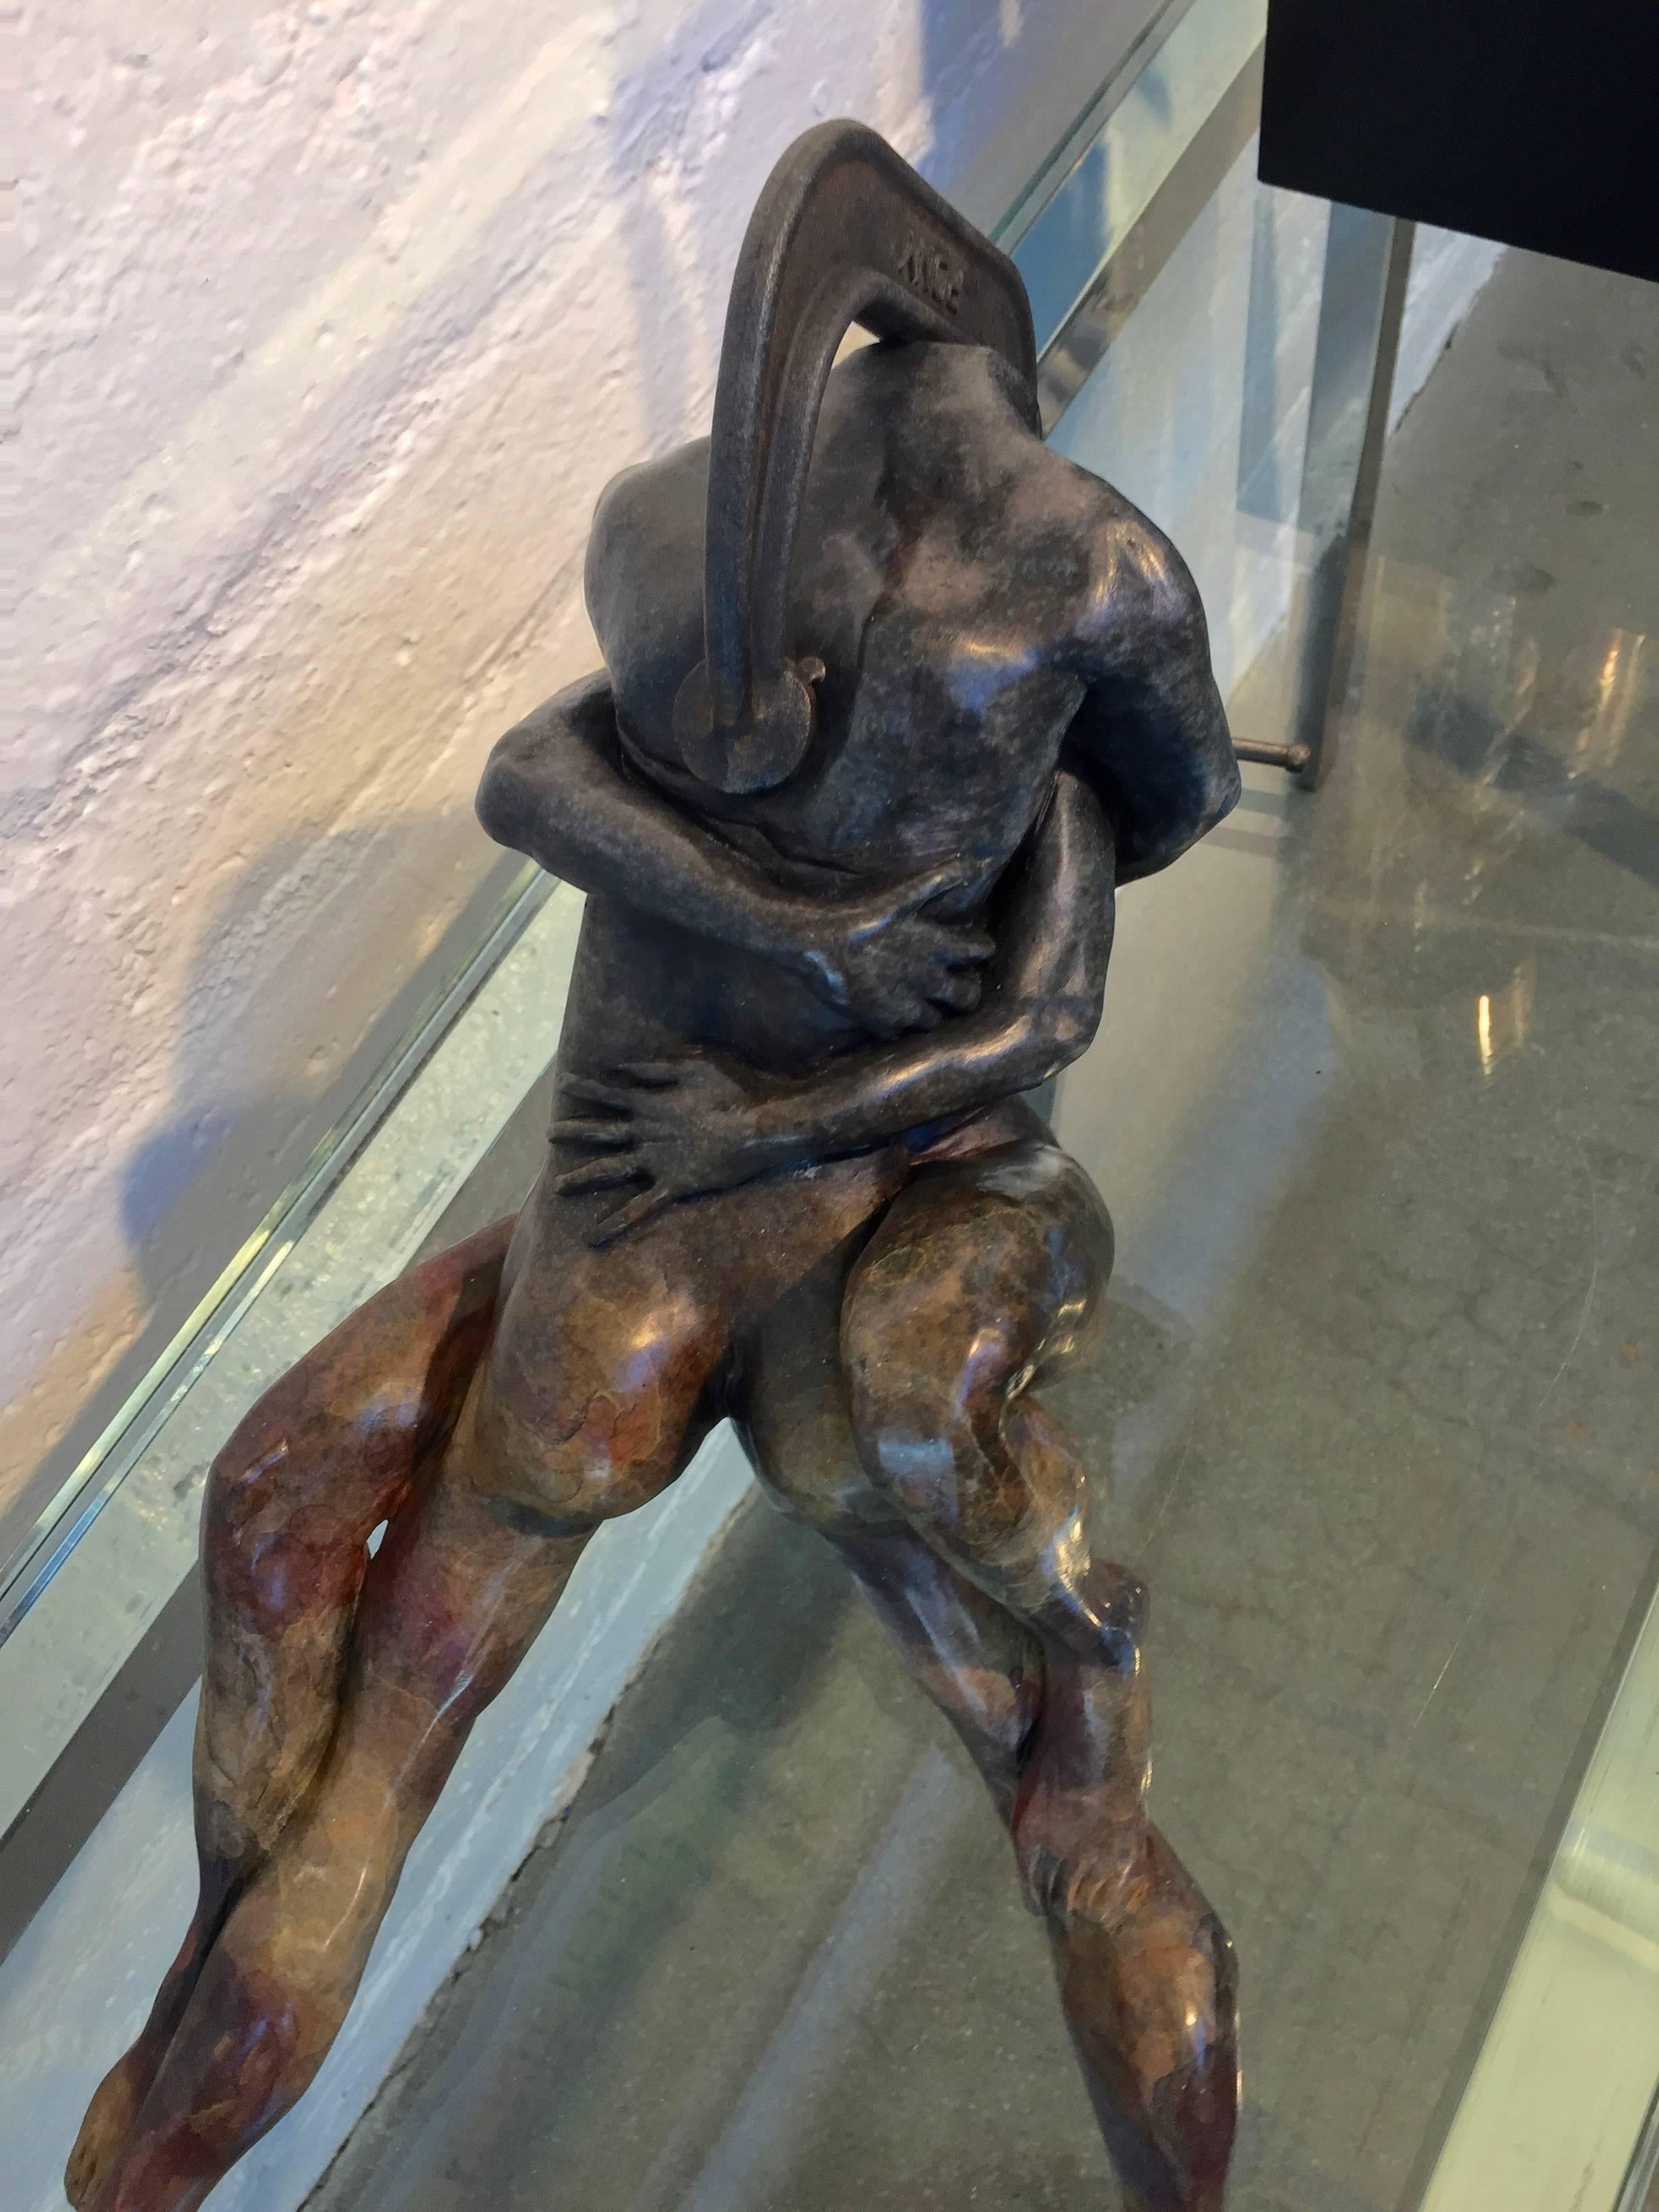 Our gallery is proud to represent the very talented Film and Commercial Director Steven Michael Beck as he creates bronzes mixed with found objects. This bronze it titled 